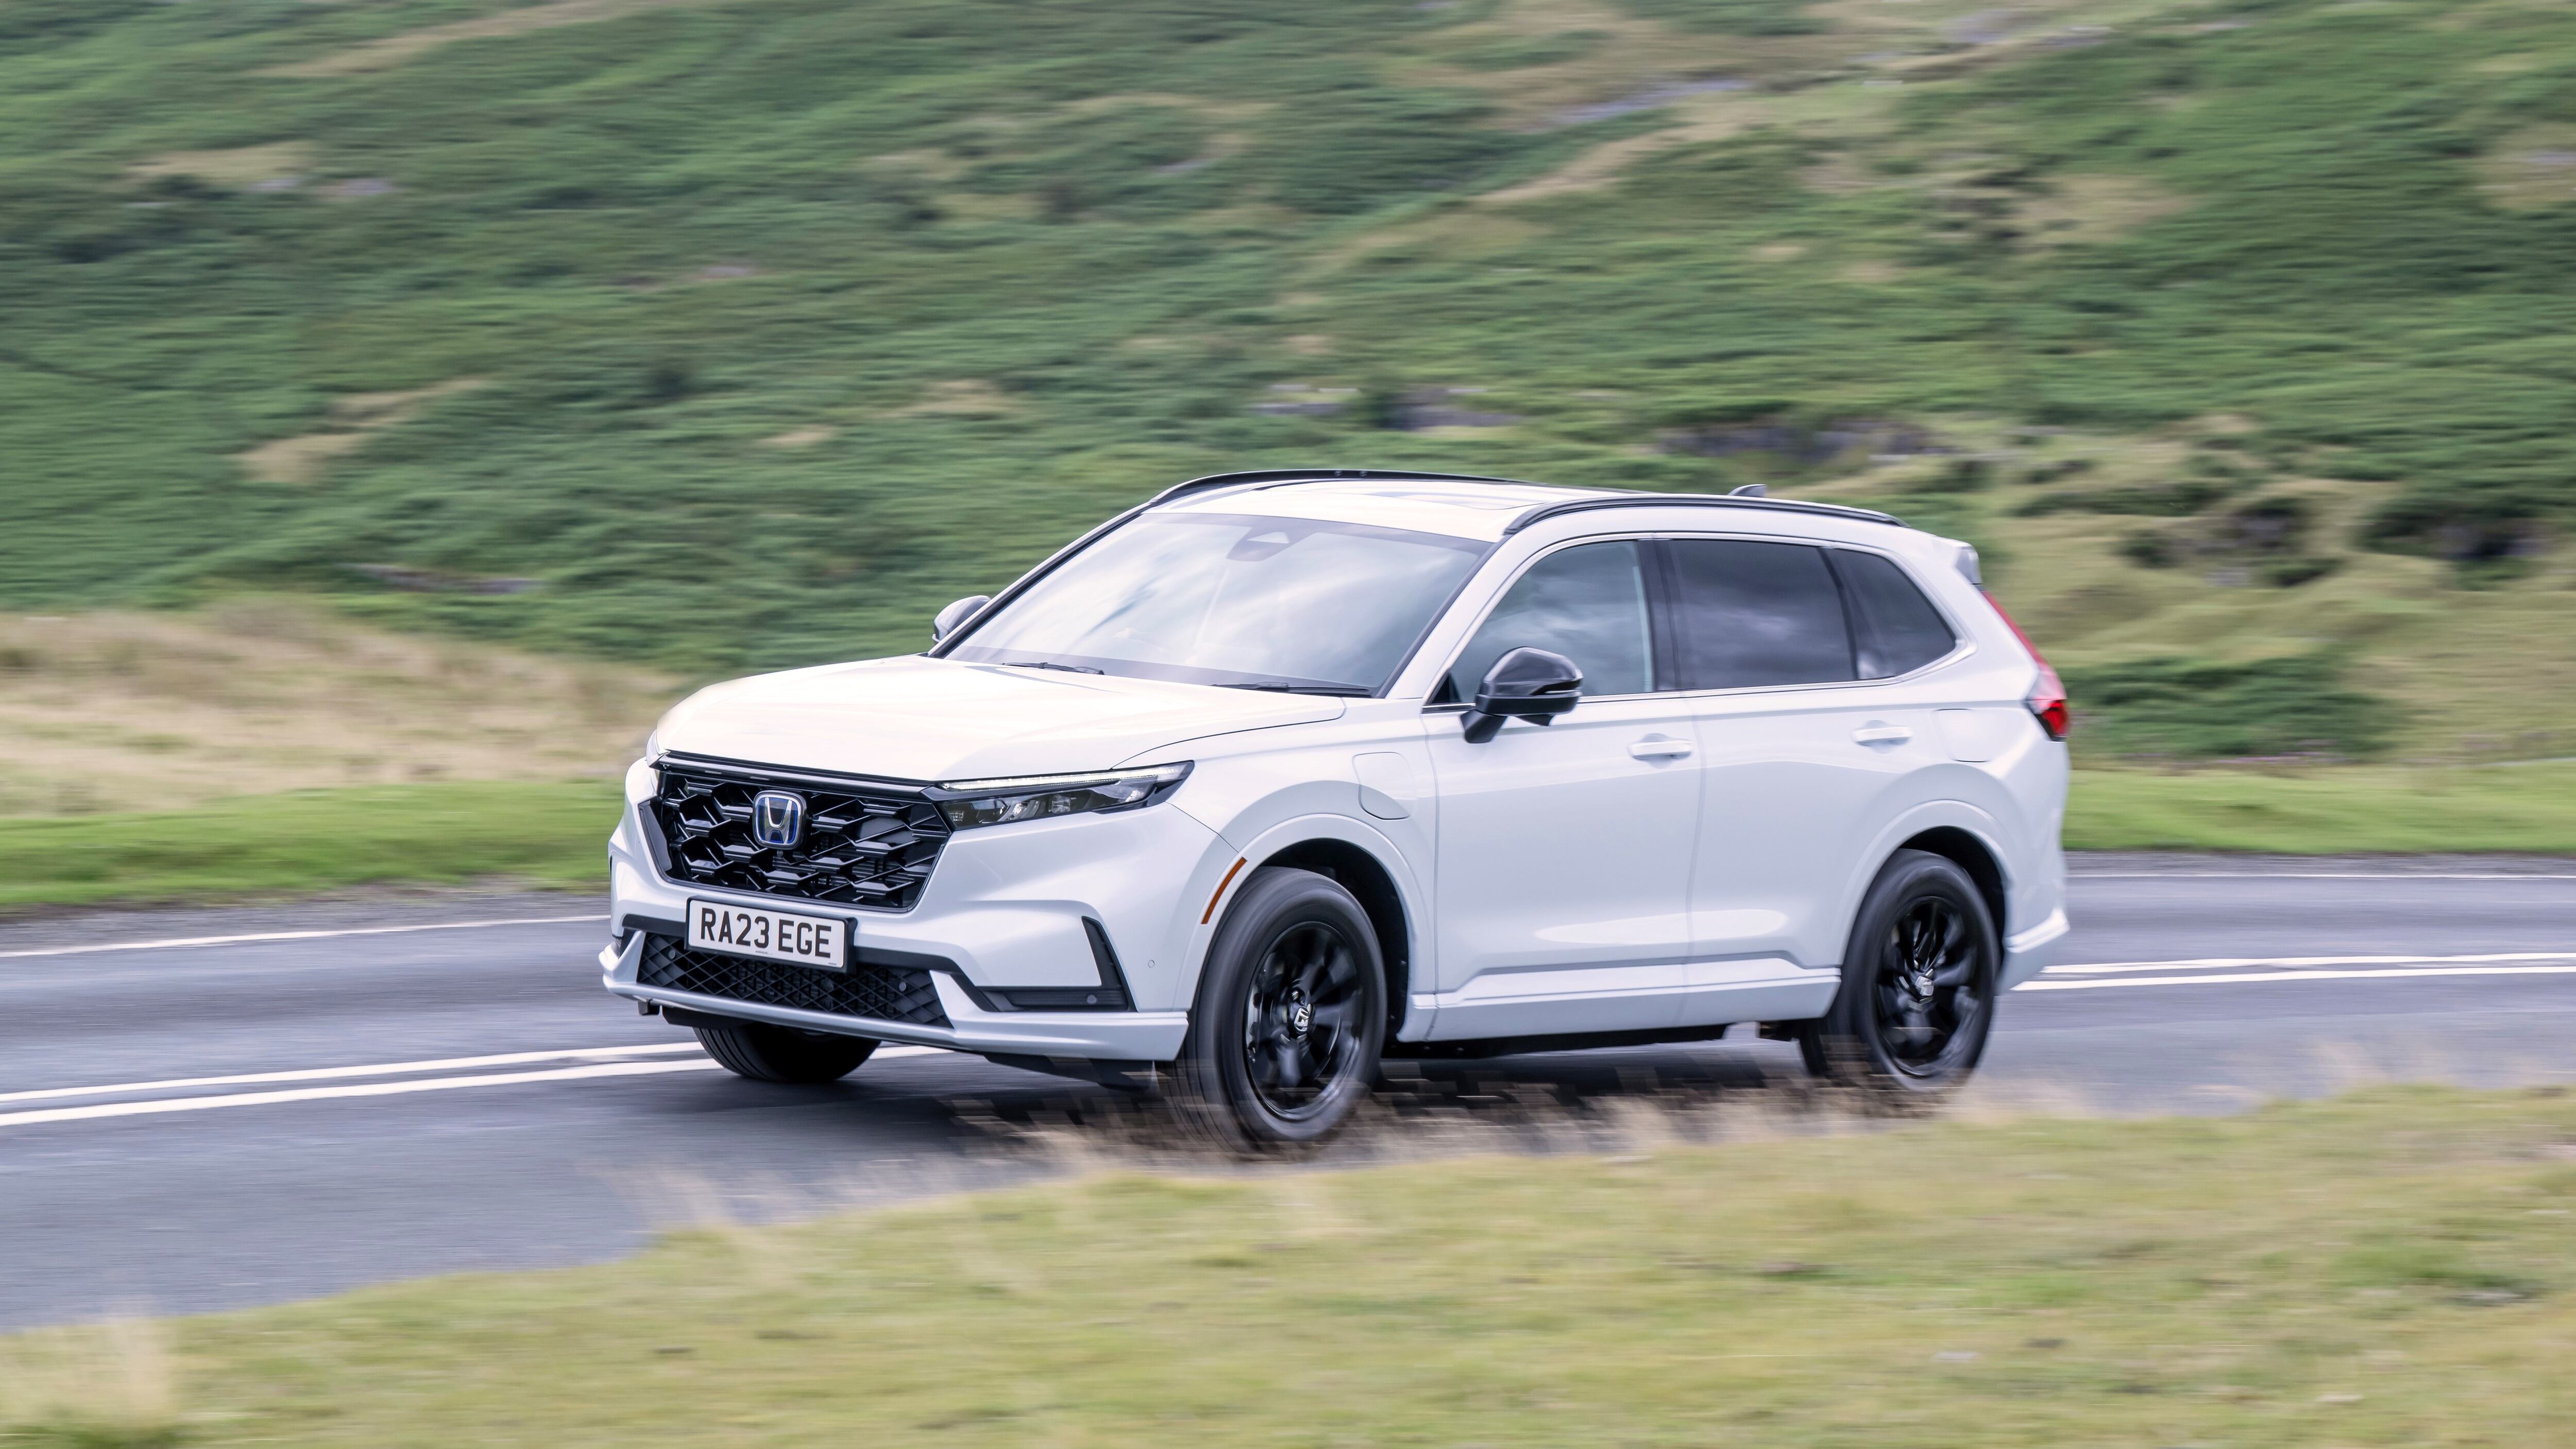 Does Honda’s latest CR-V live up to its high price tag? (Honda)